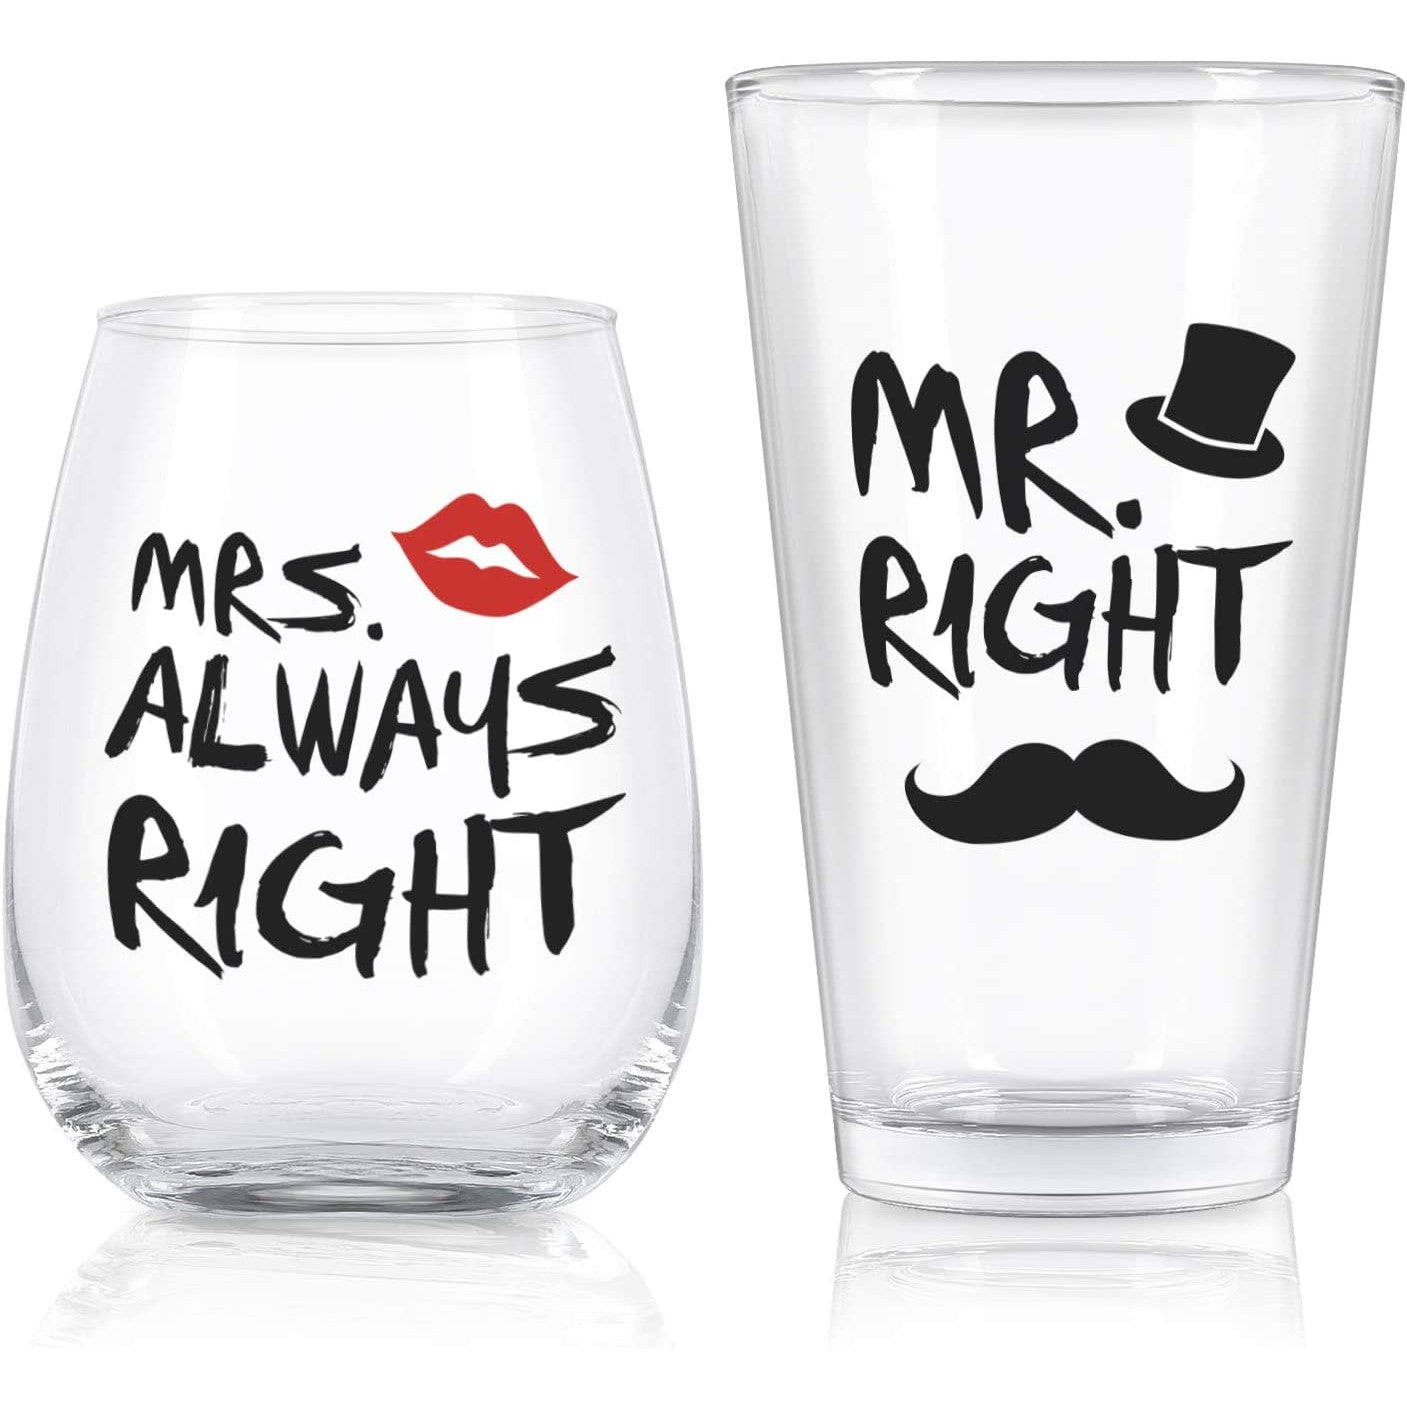 A stemless wine glass which says Mrs Always Right and a beer glass which says Mr Right.